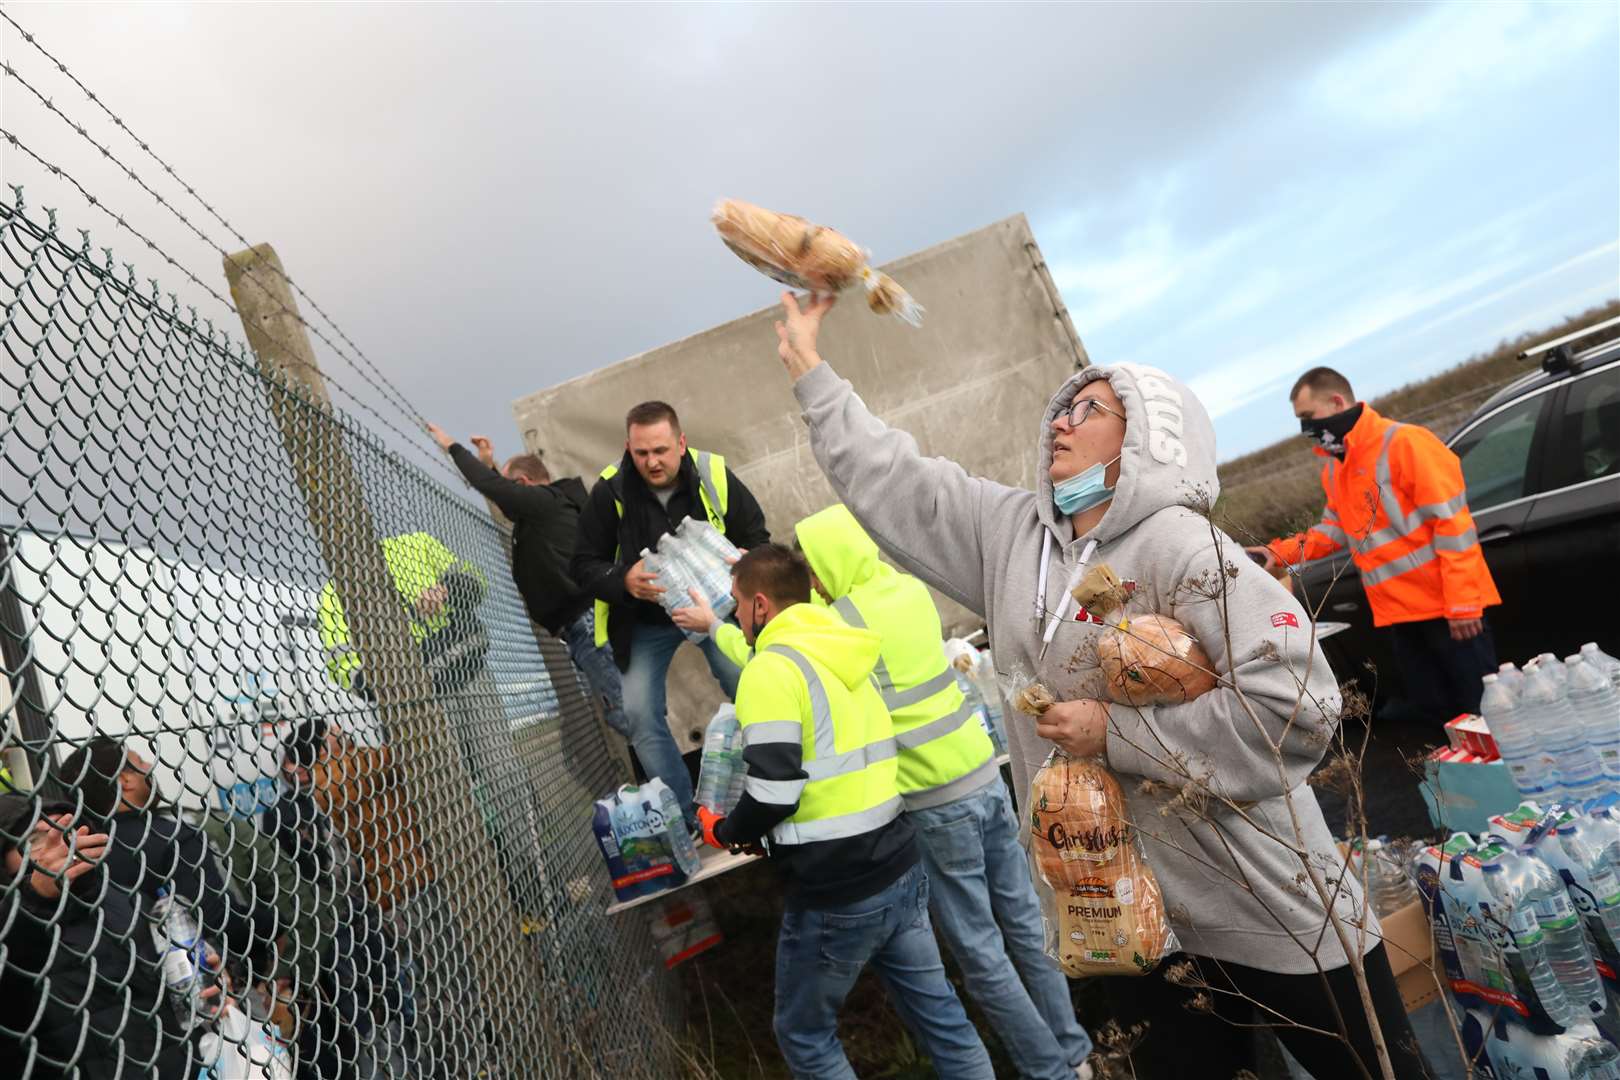 Bread making it's way over the fence.Picture: Barry Goodwin.